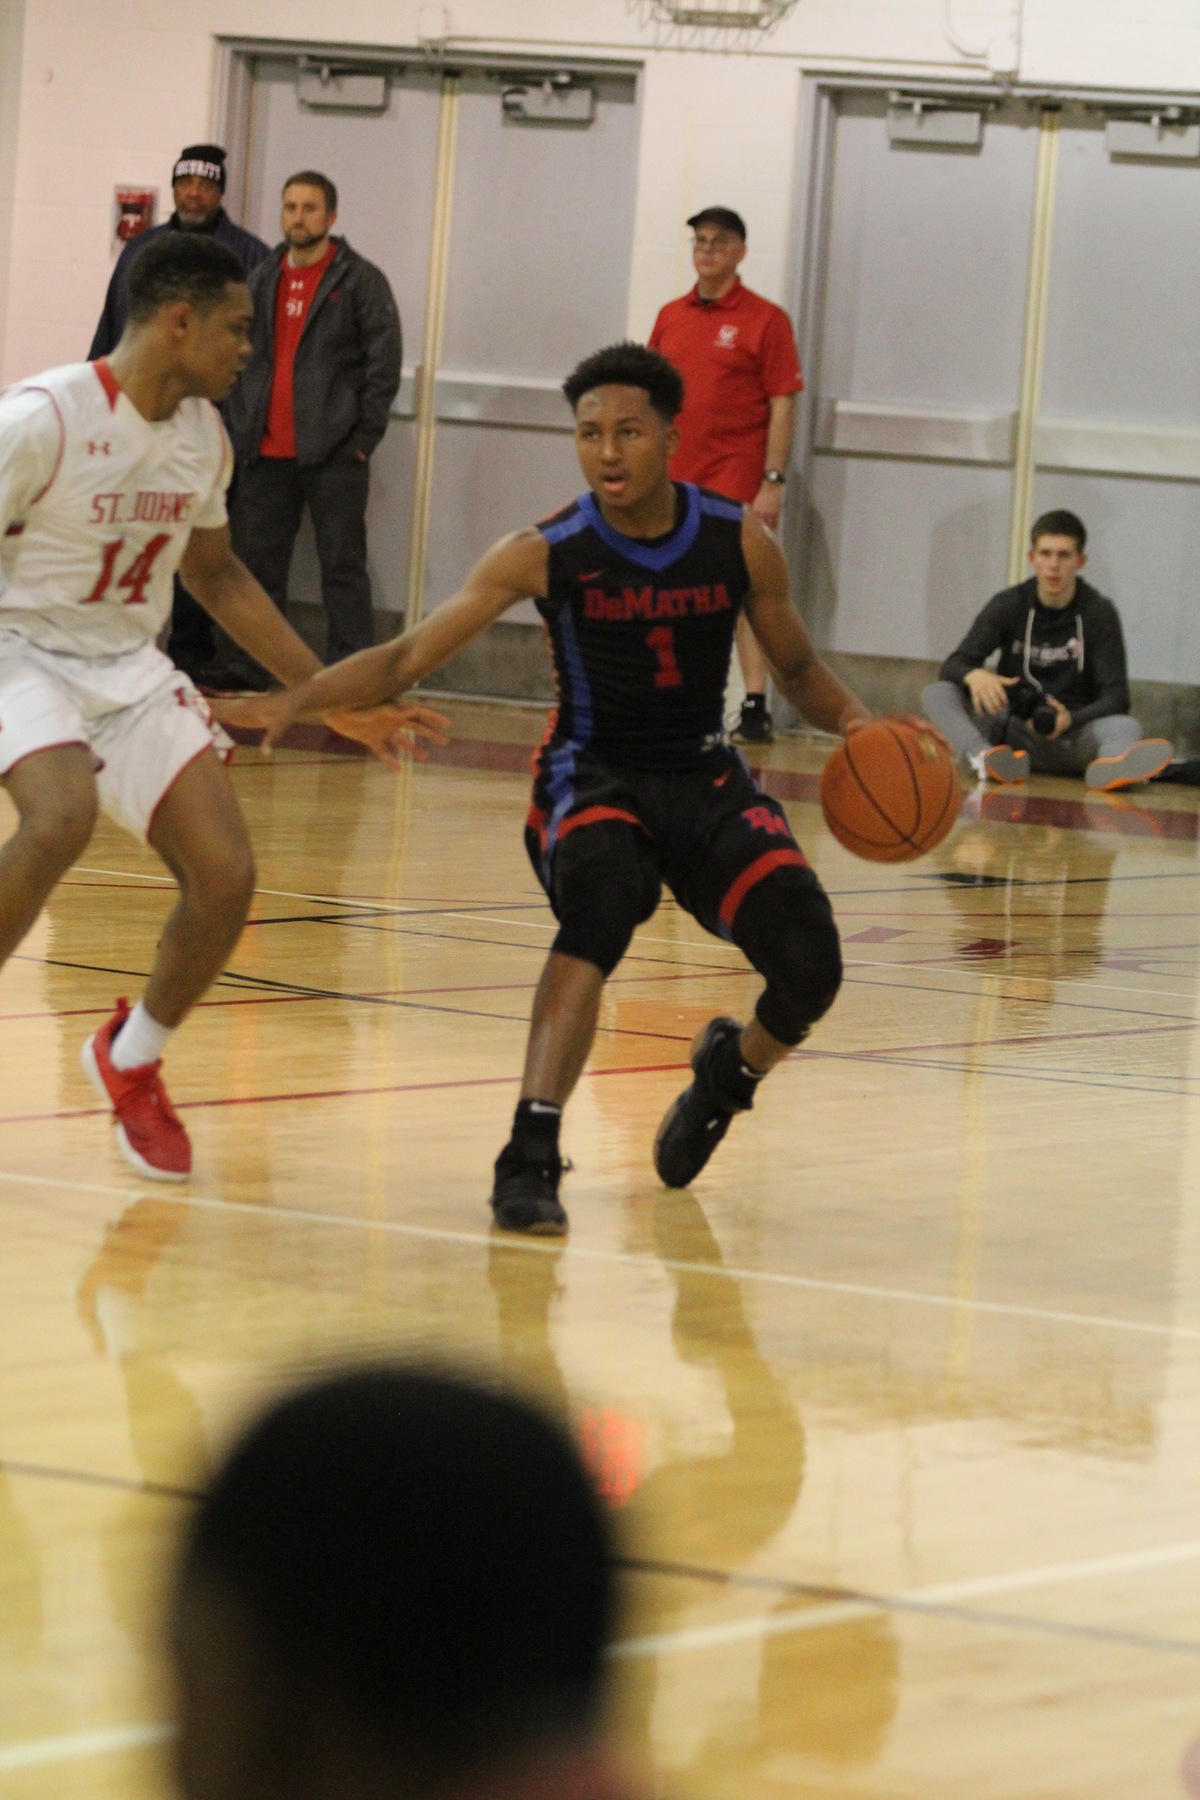 DeMatha continues to impress with their new found depth.